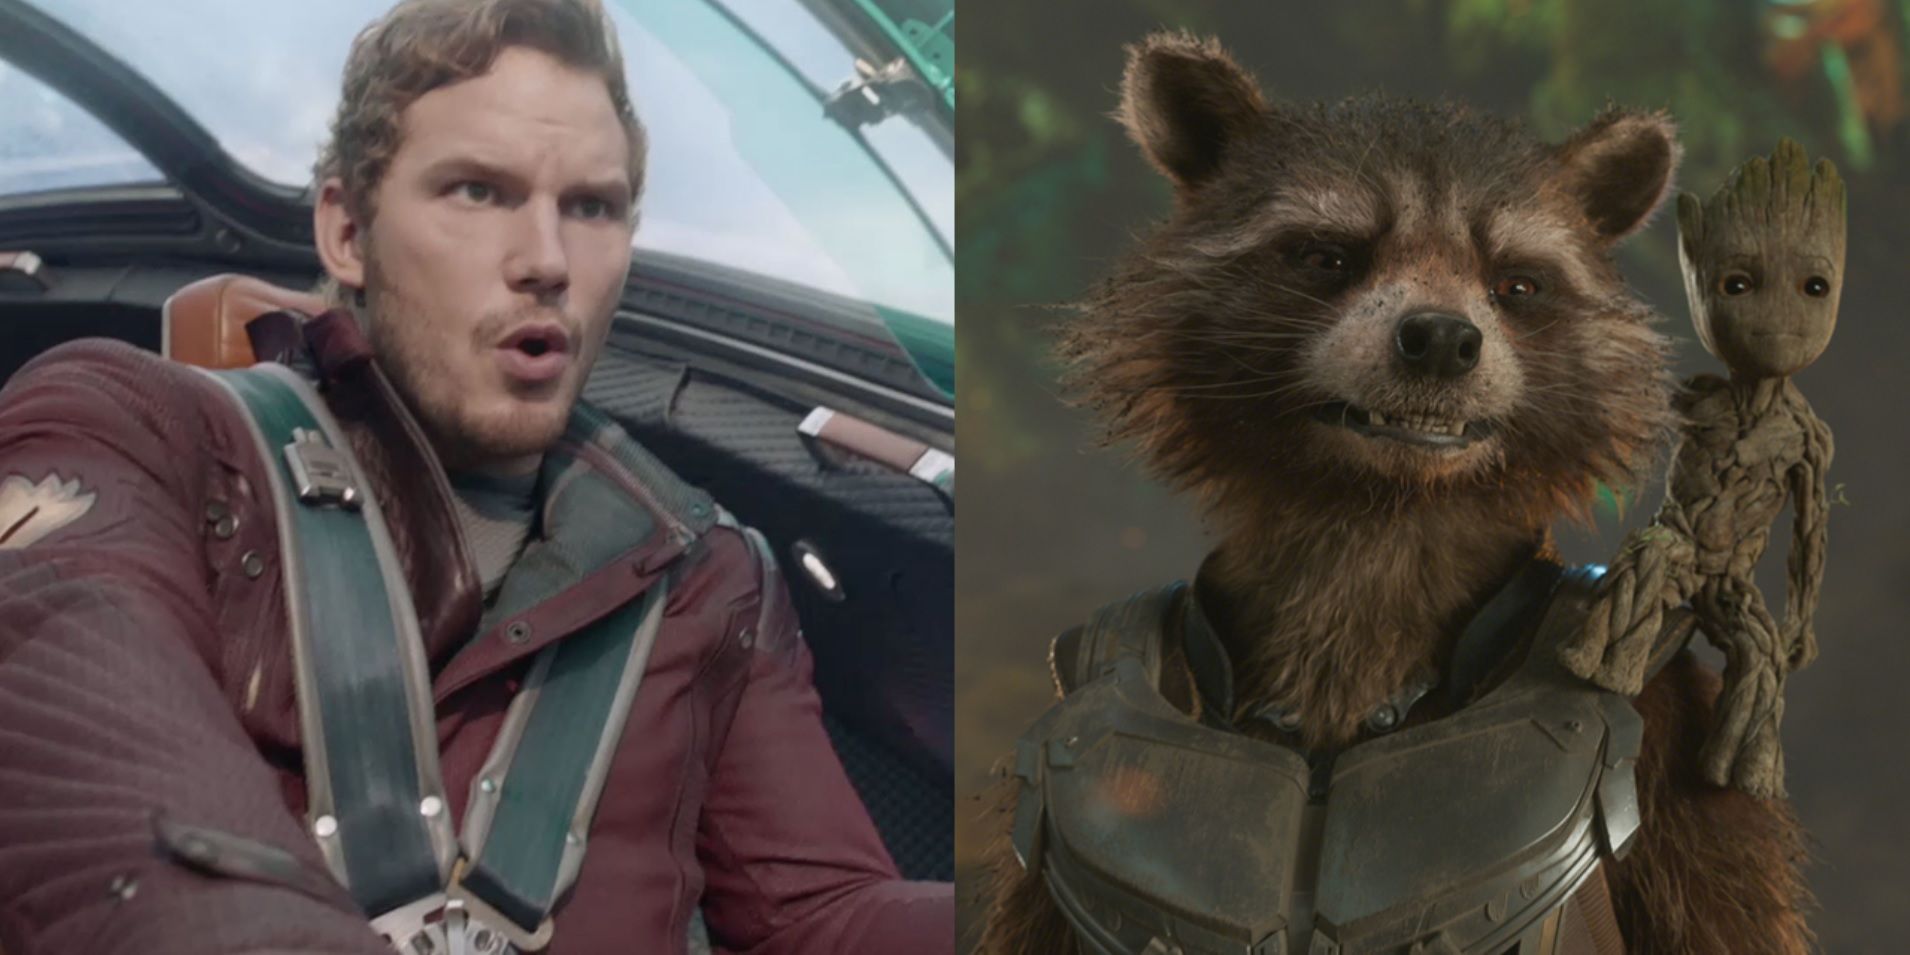 Split image of Quill, Rocket, and Groot in the Guardians of the Galaxy films